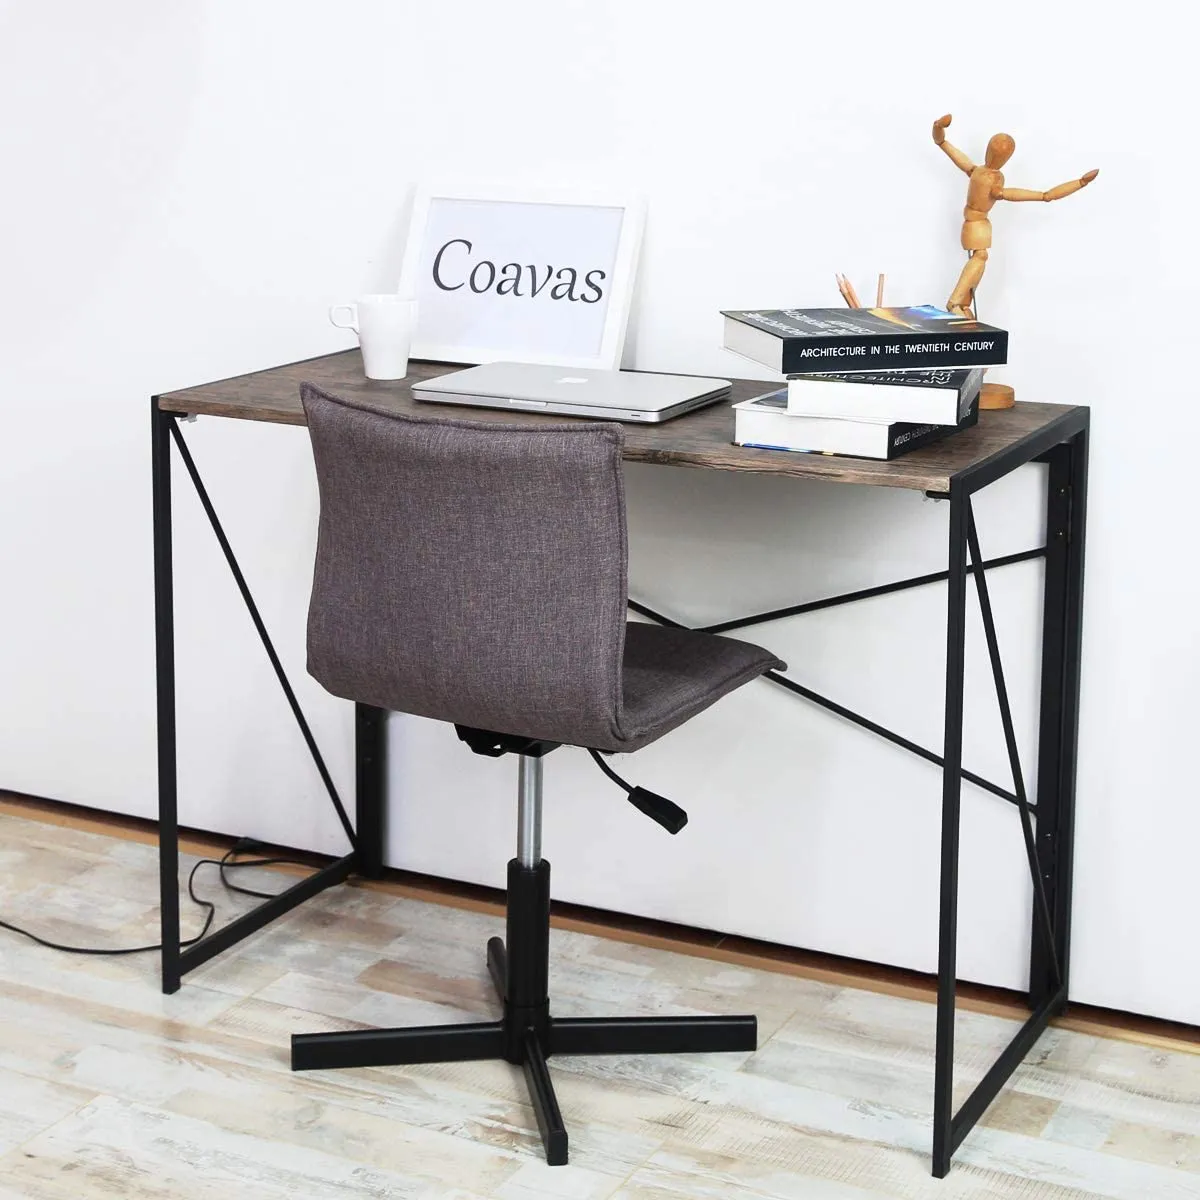 Modern and simple industrial style desk for those who love minimalist but stylish designs. 2